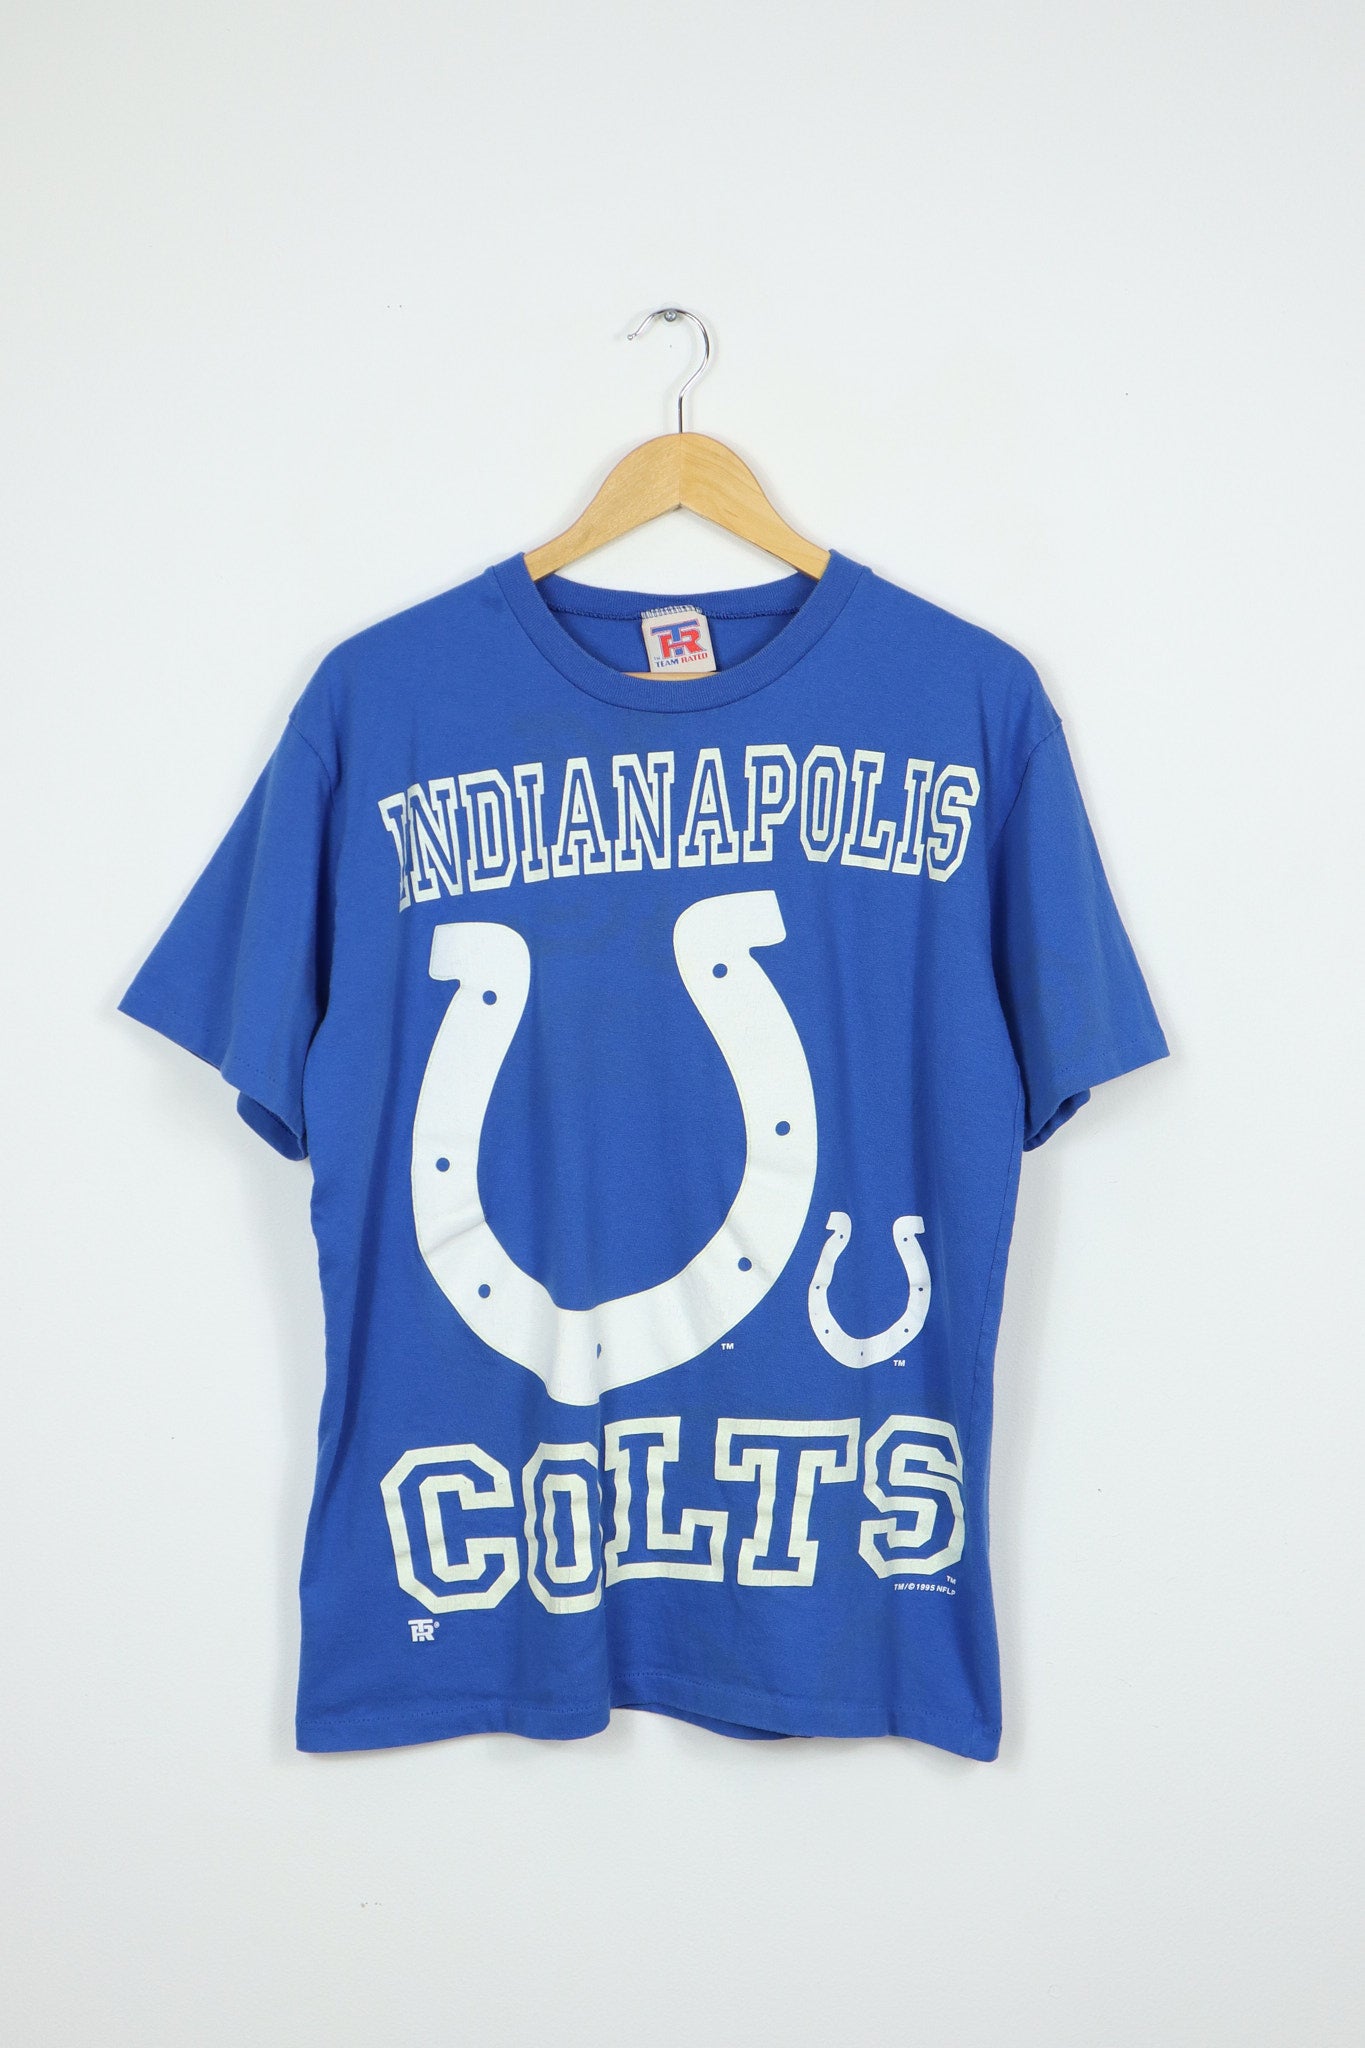 Vintage Indianapolis Colts Tee